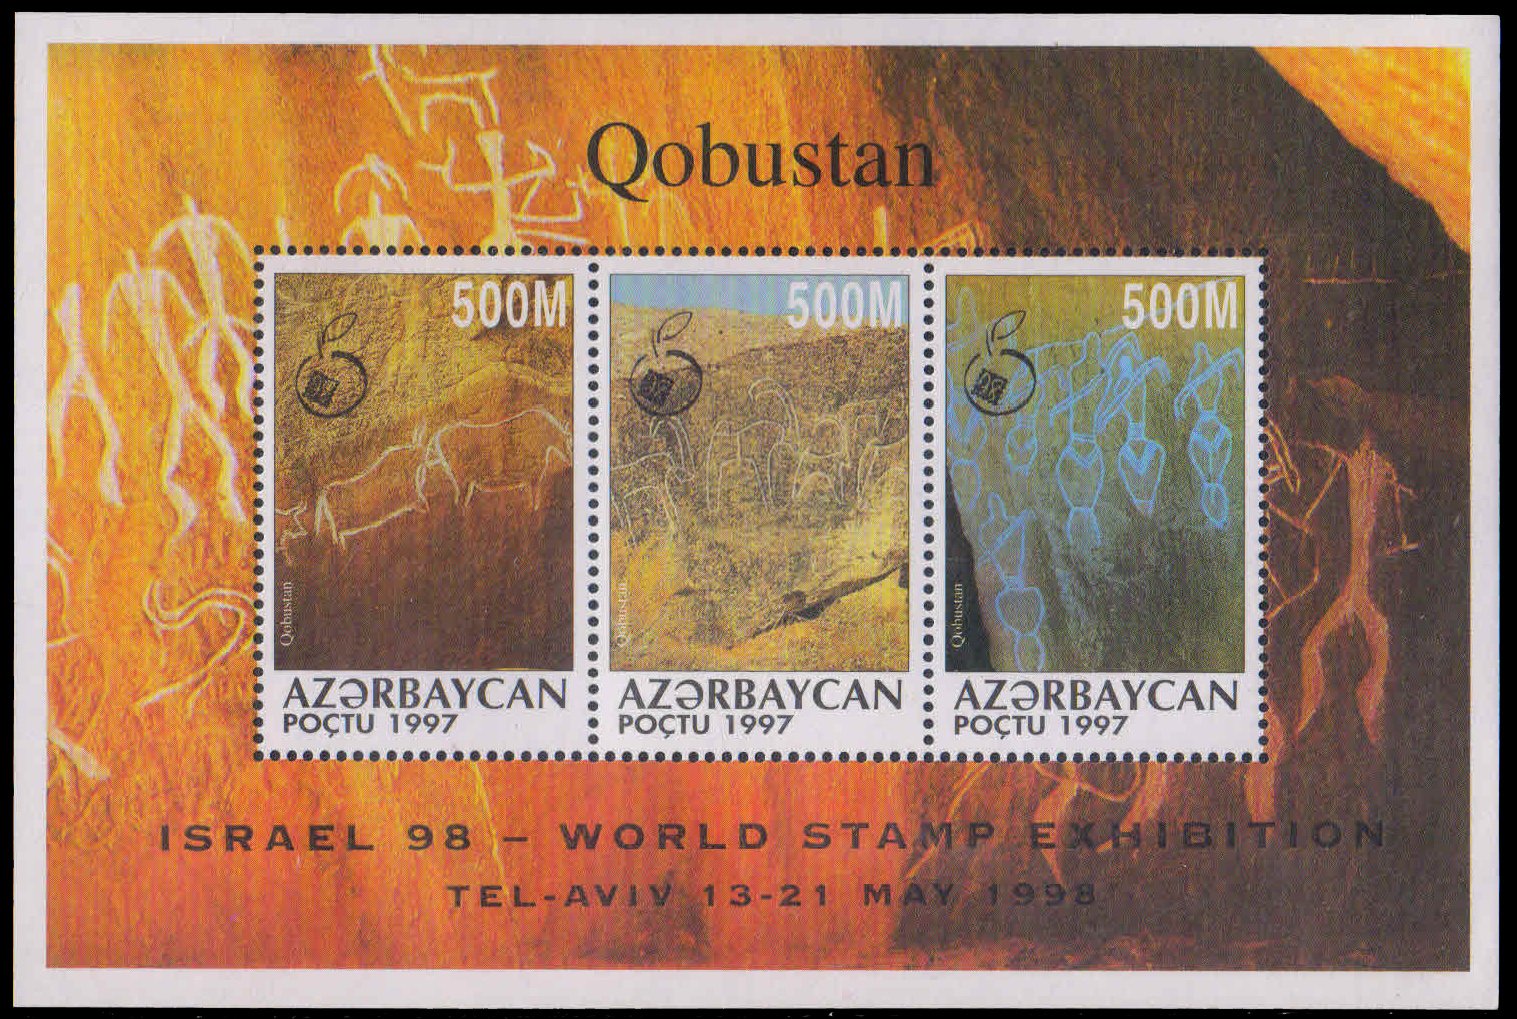 AZERBAIJAN 1998-Israel 98 Int. Stamp Exhibition, Oobustash Rock Carving, M/S of 3 Stamps, MNH, S.G. MS 435, Cat � 14.50